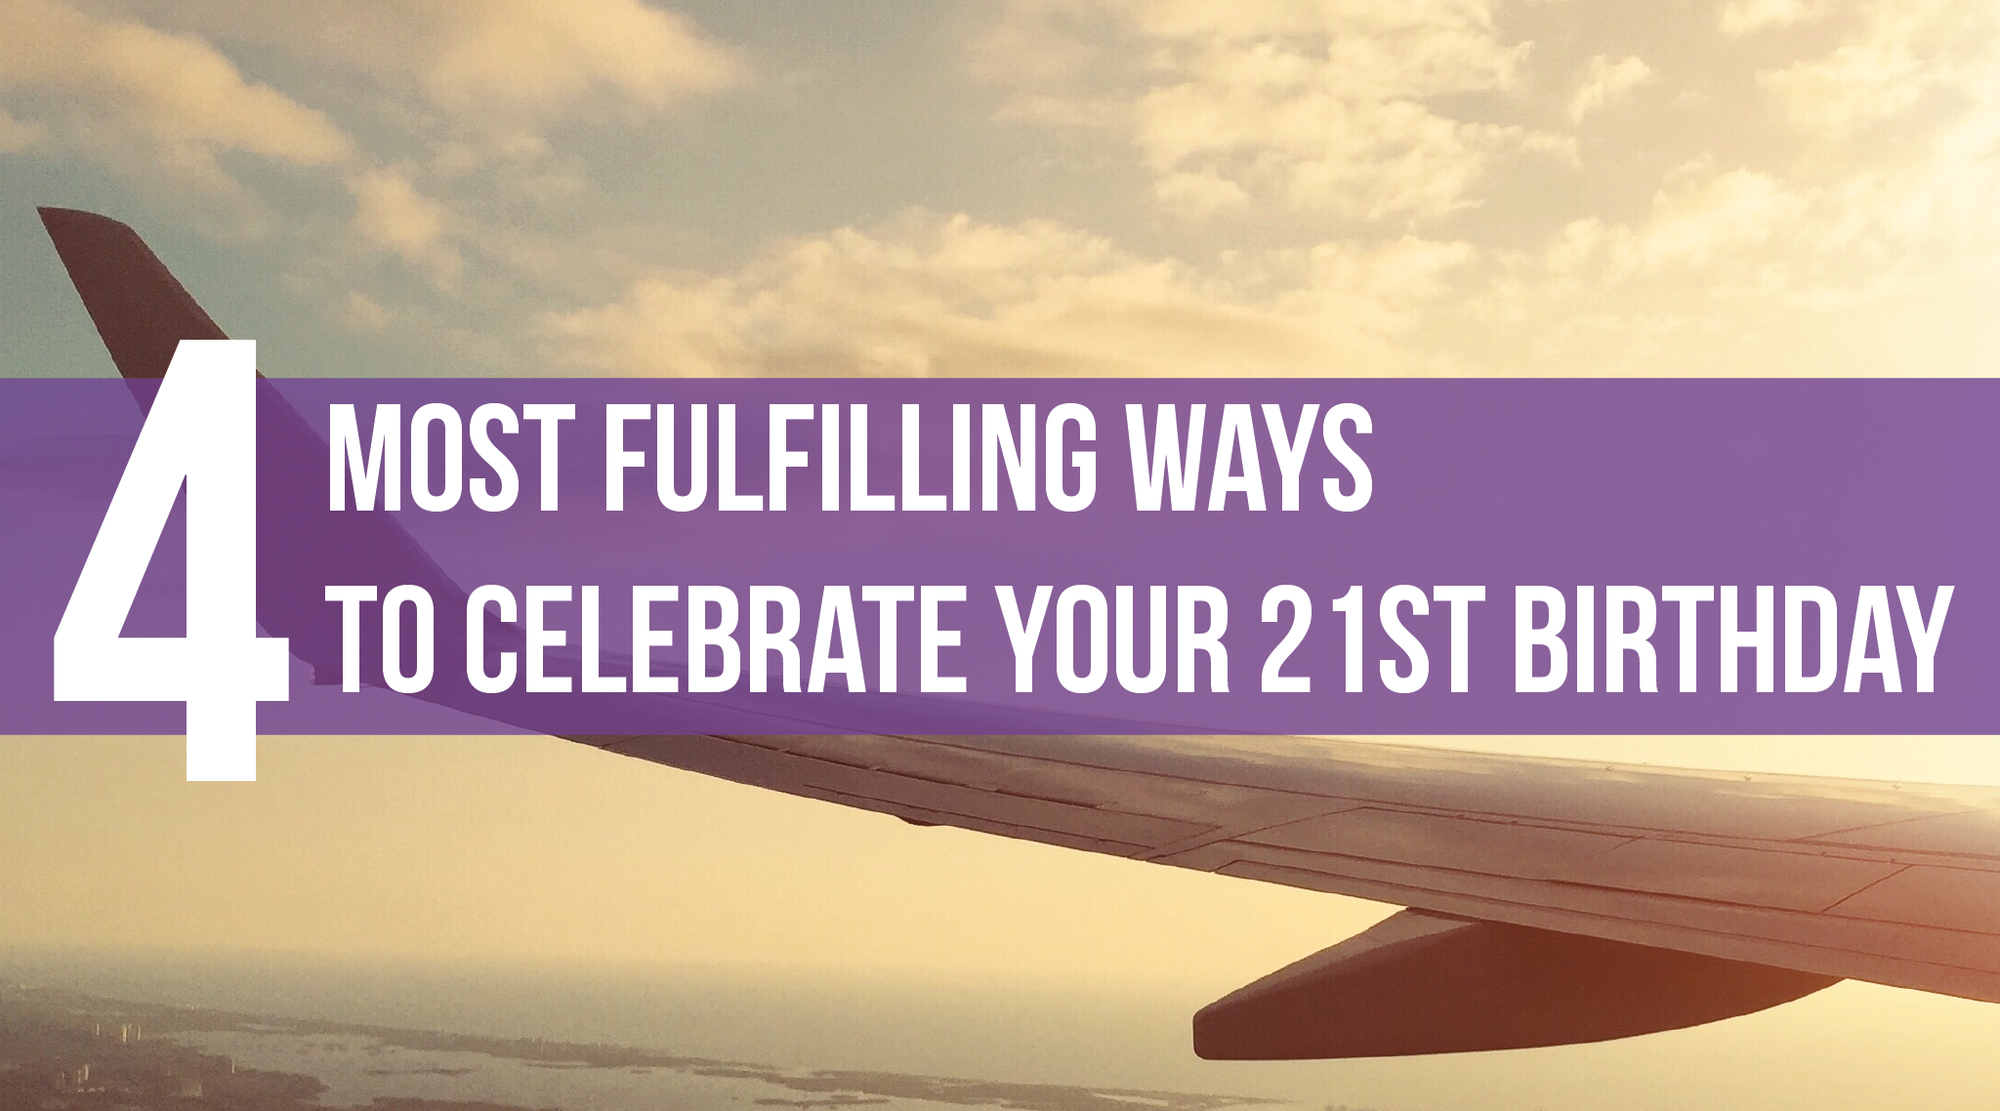 4 Most Fulfilling Ways to Celebrate Your 21st Birthday